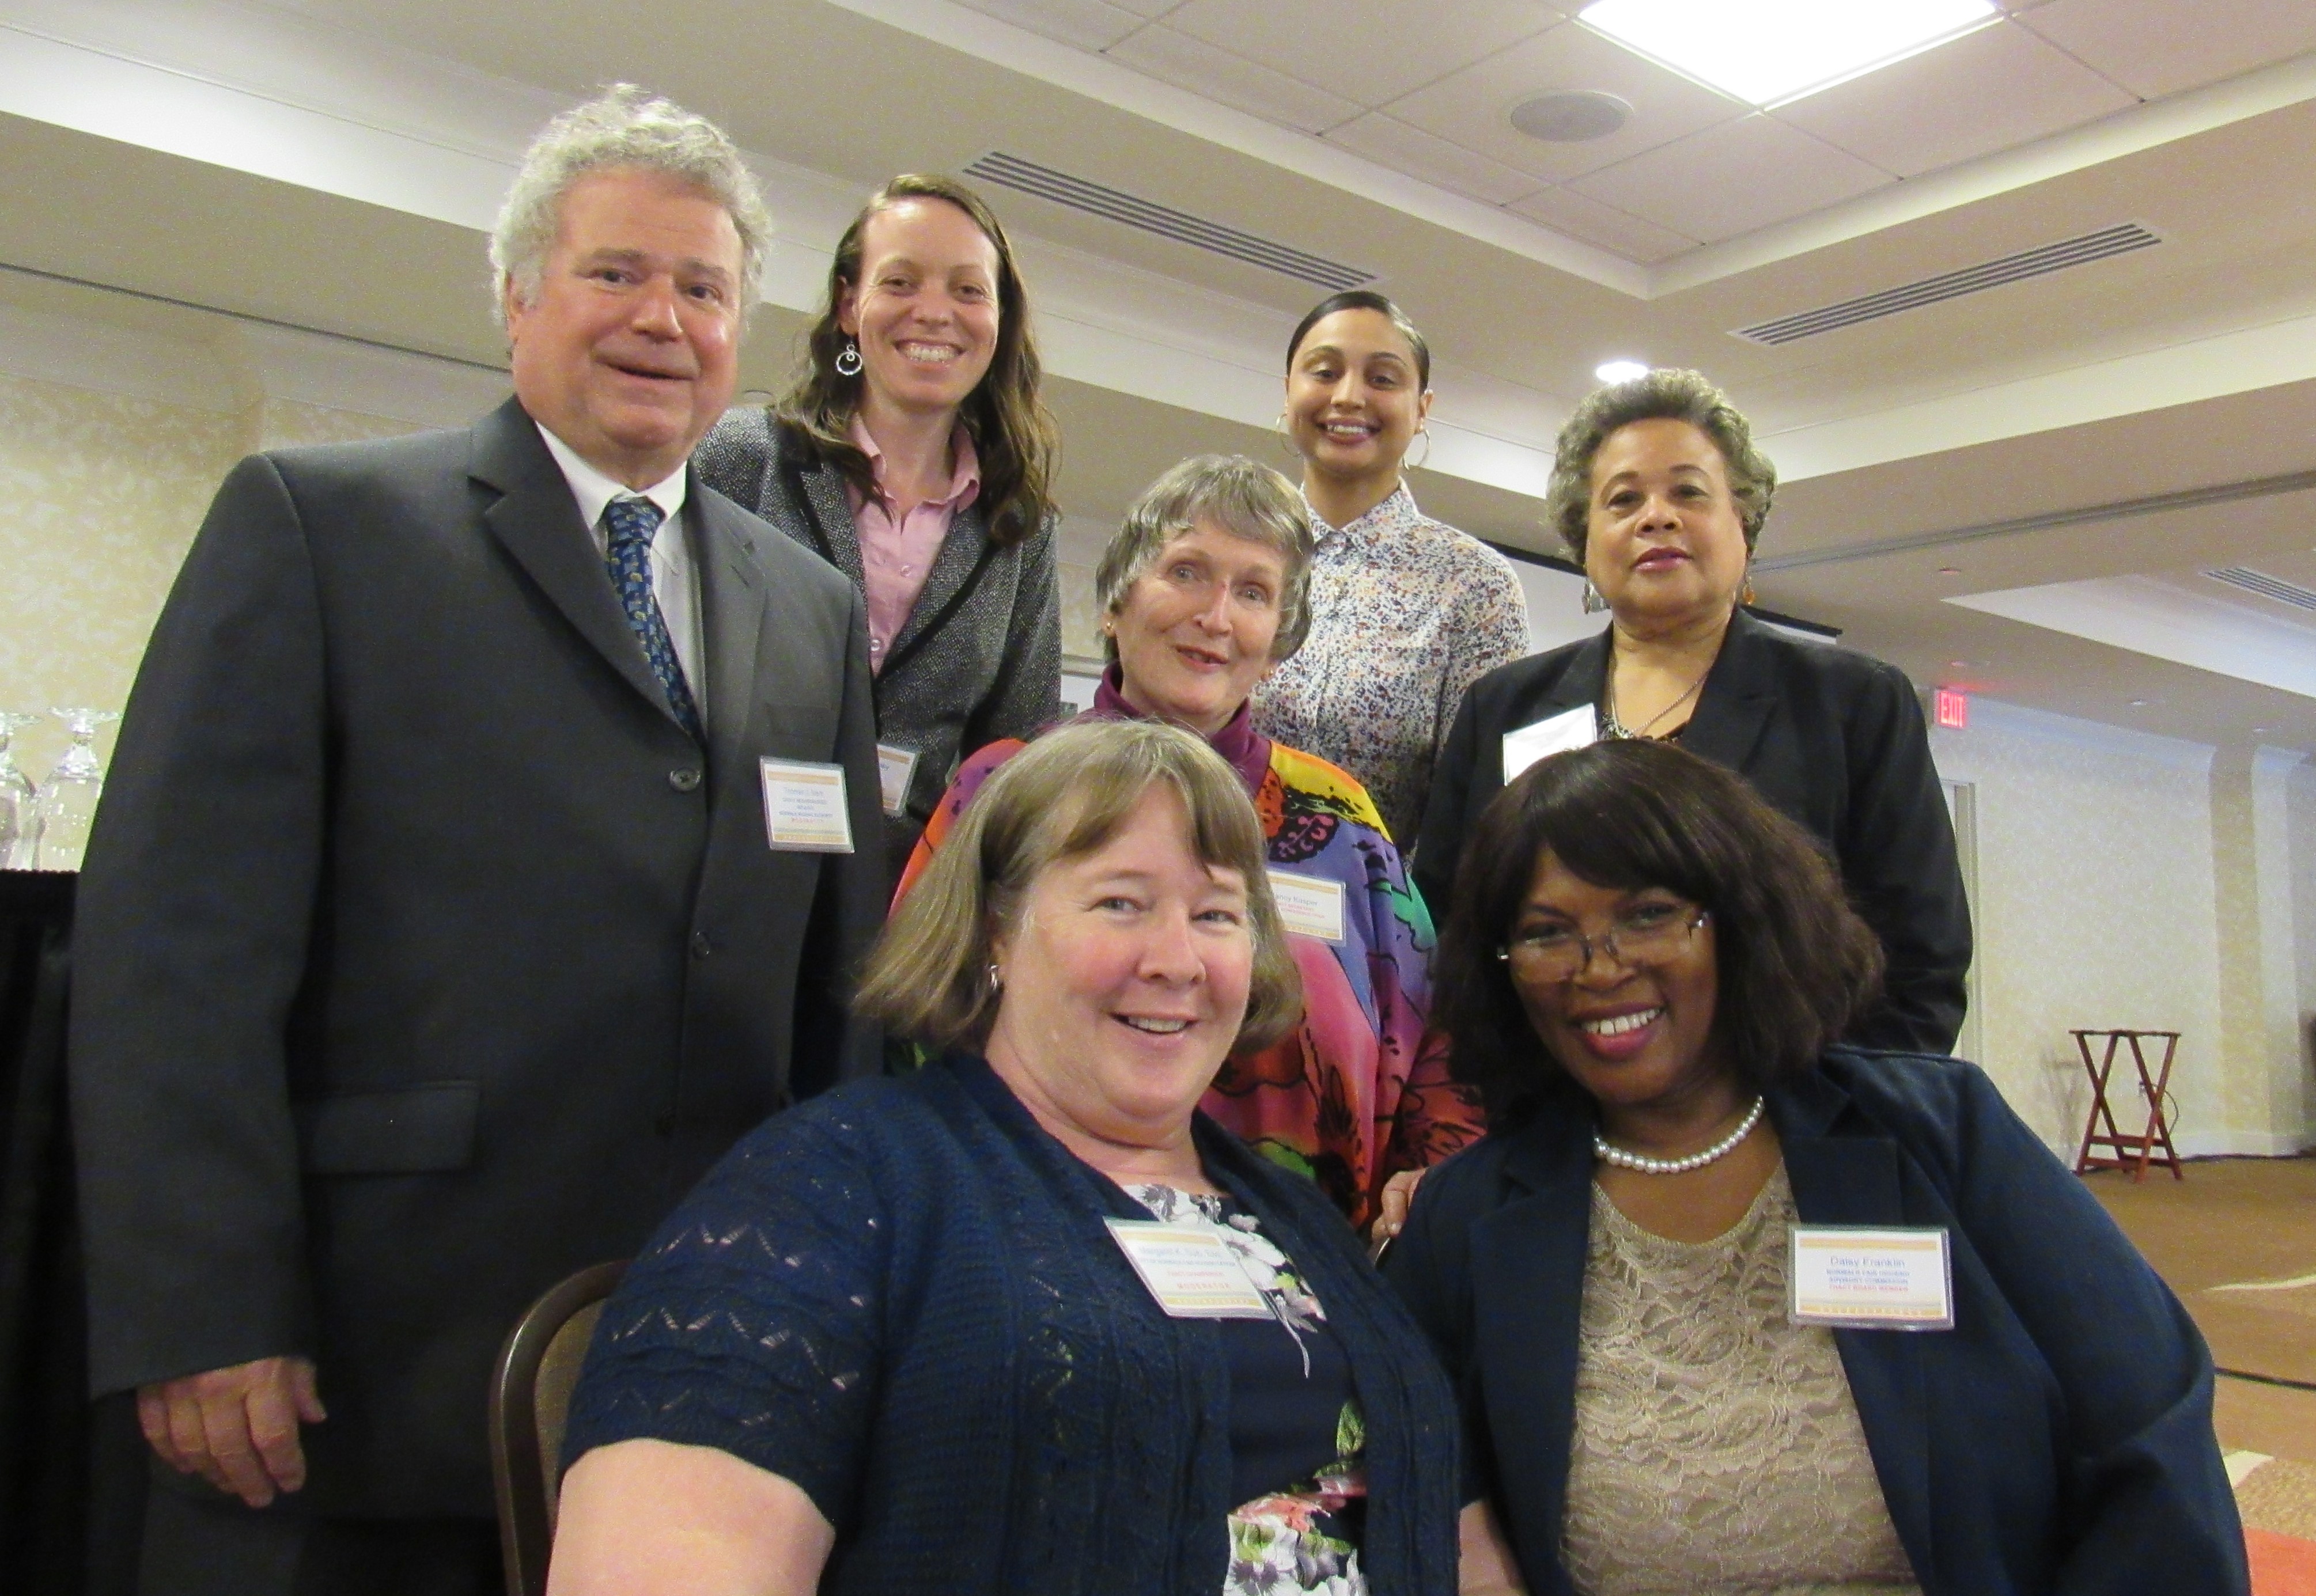 FHACT's Board of Directors are pictured at the recent conference - group of seven people, some seated and some standing, dressed professionally.